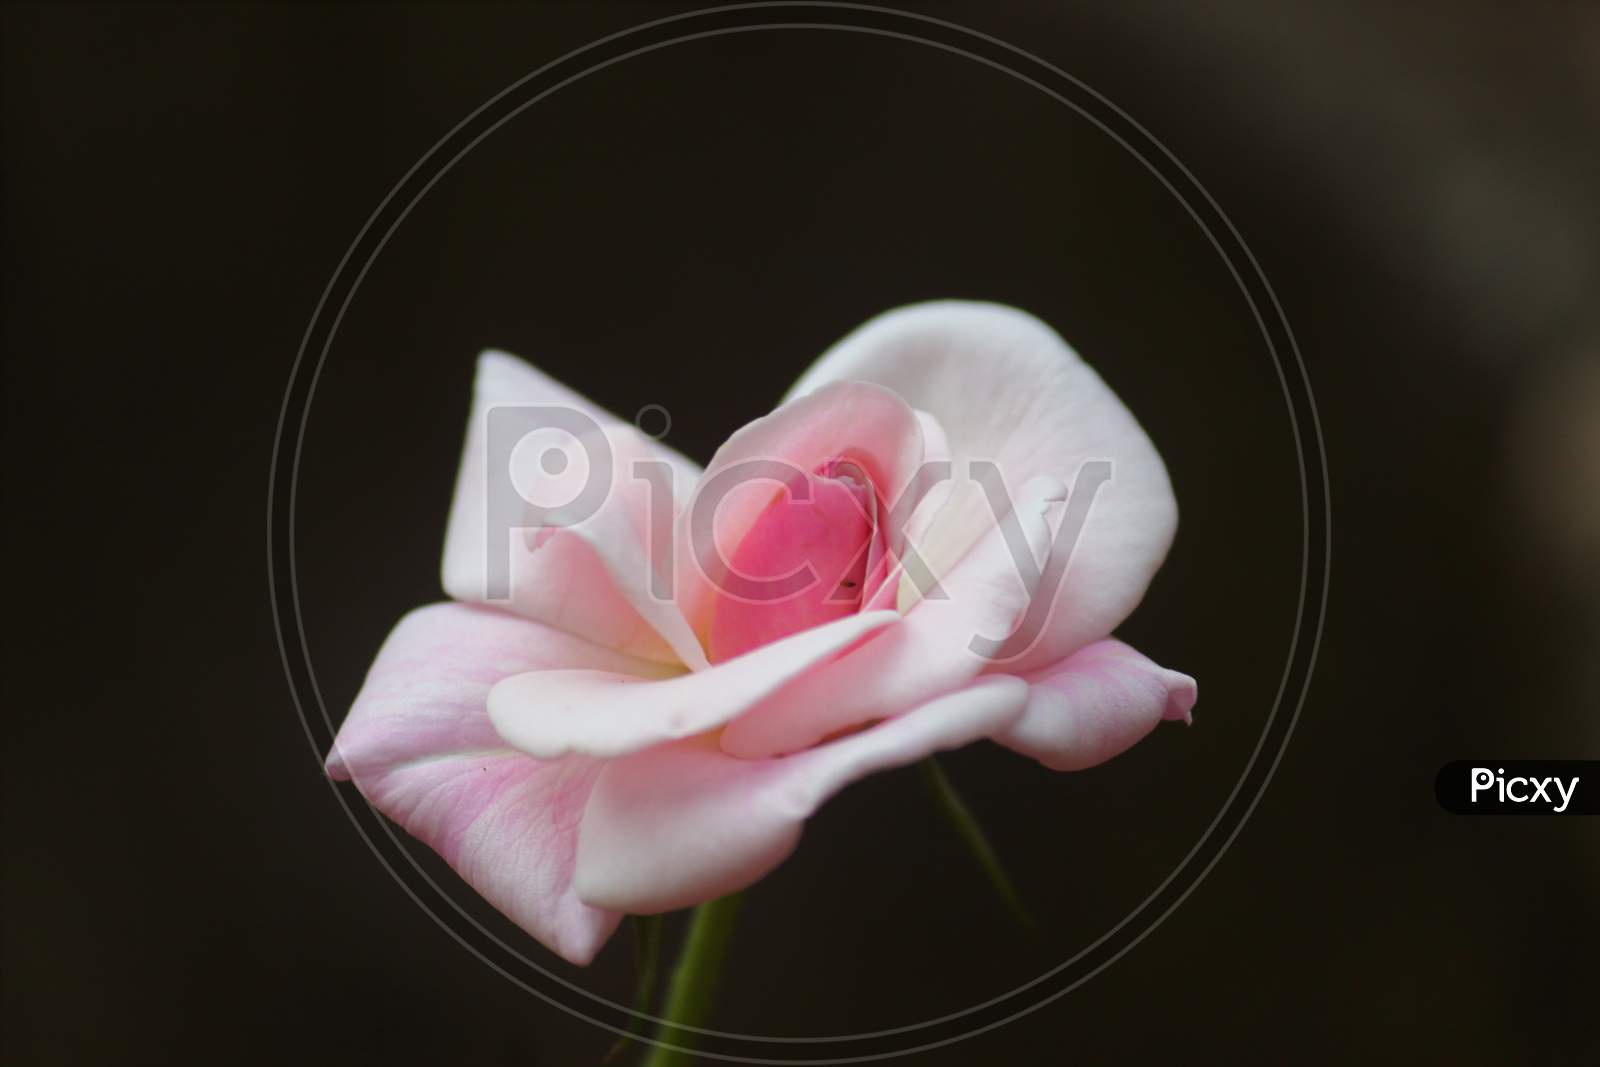 A beautiful pink rose smiles at you